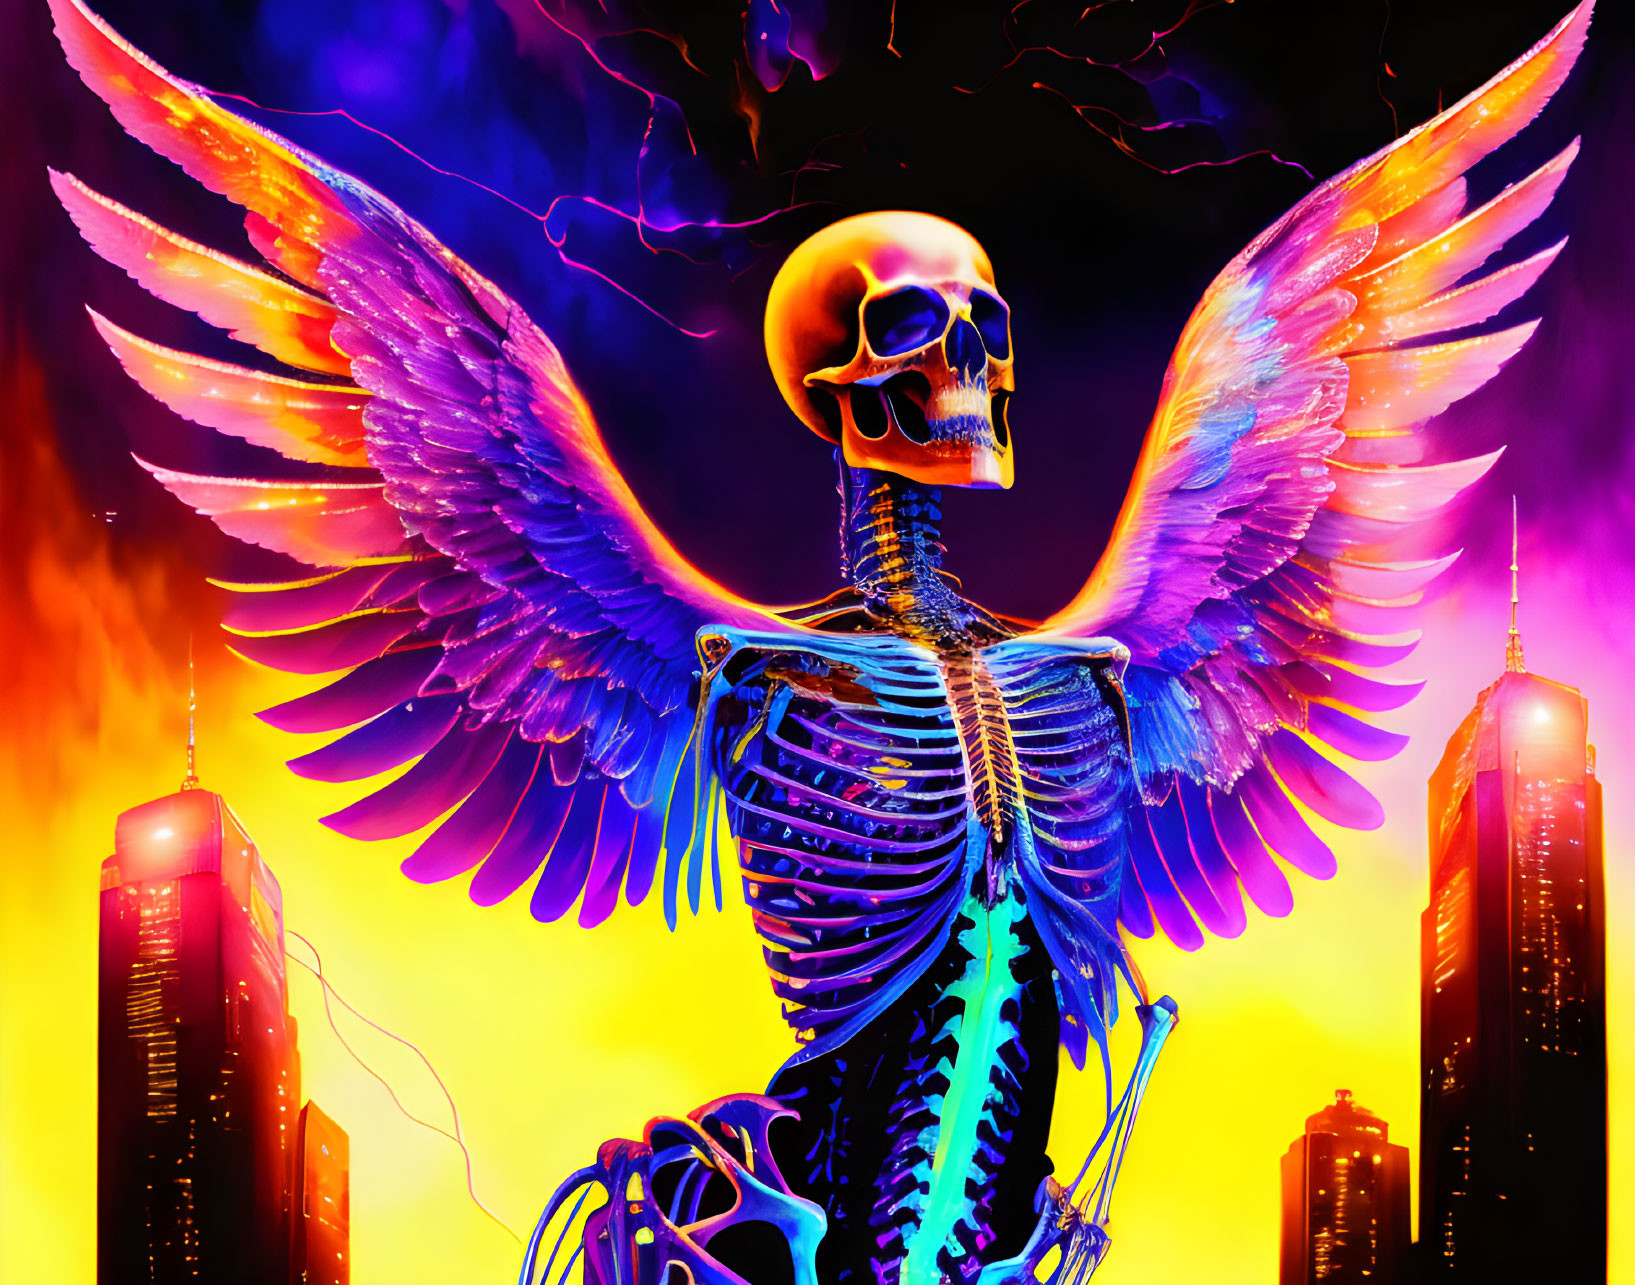 Colorful Skeleton with Wings Soars Over Cityscape in Surreal Scene